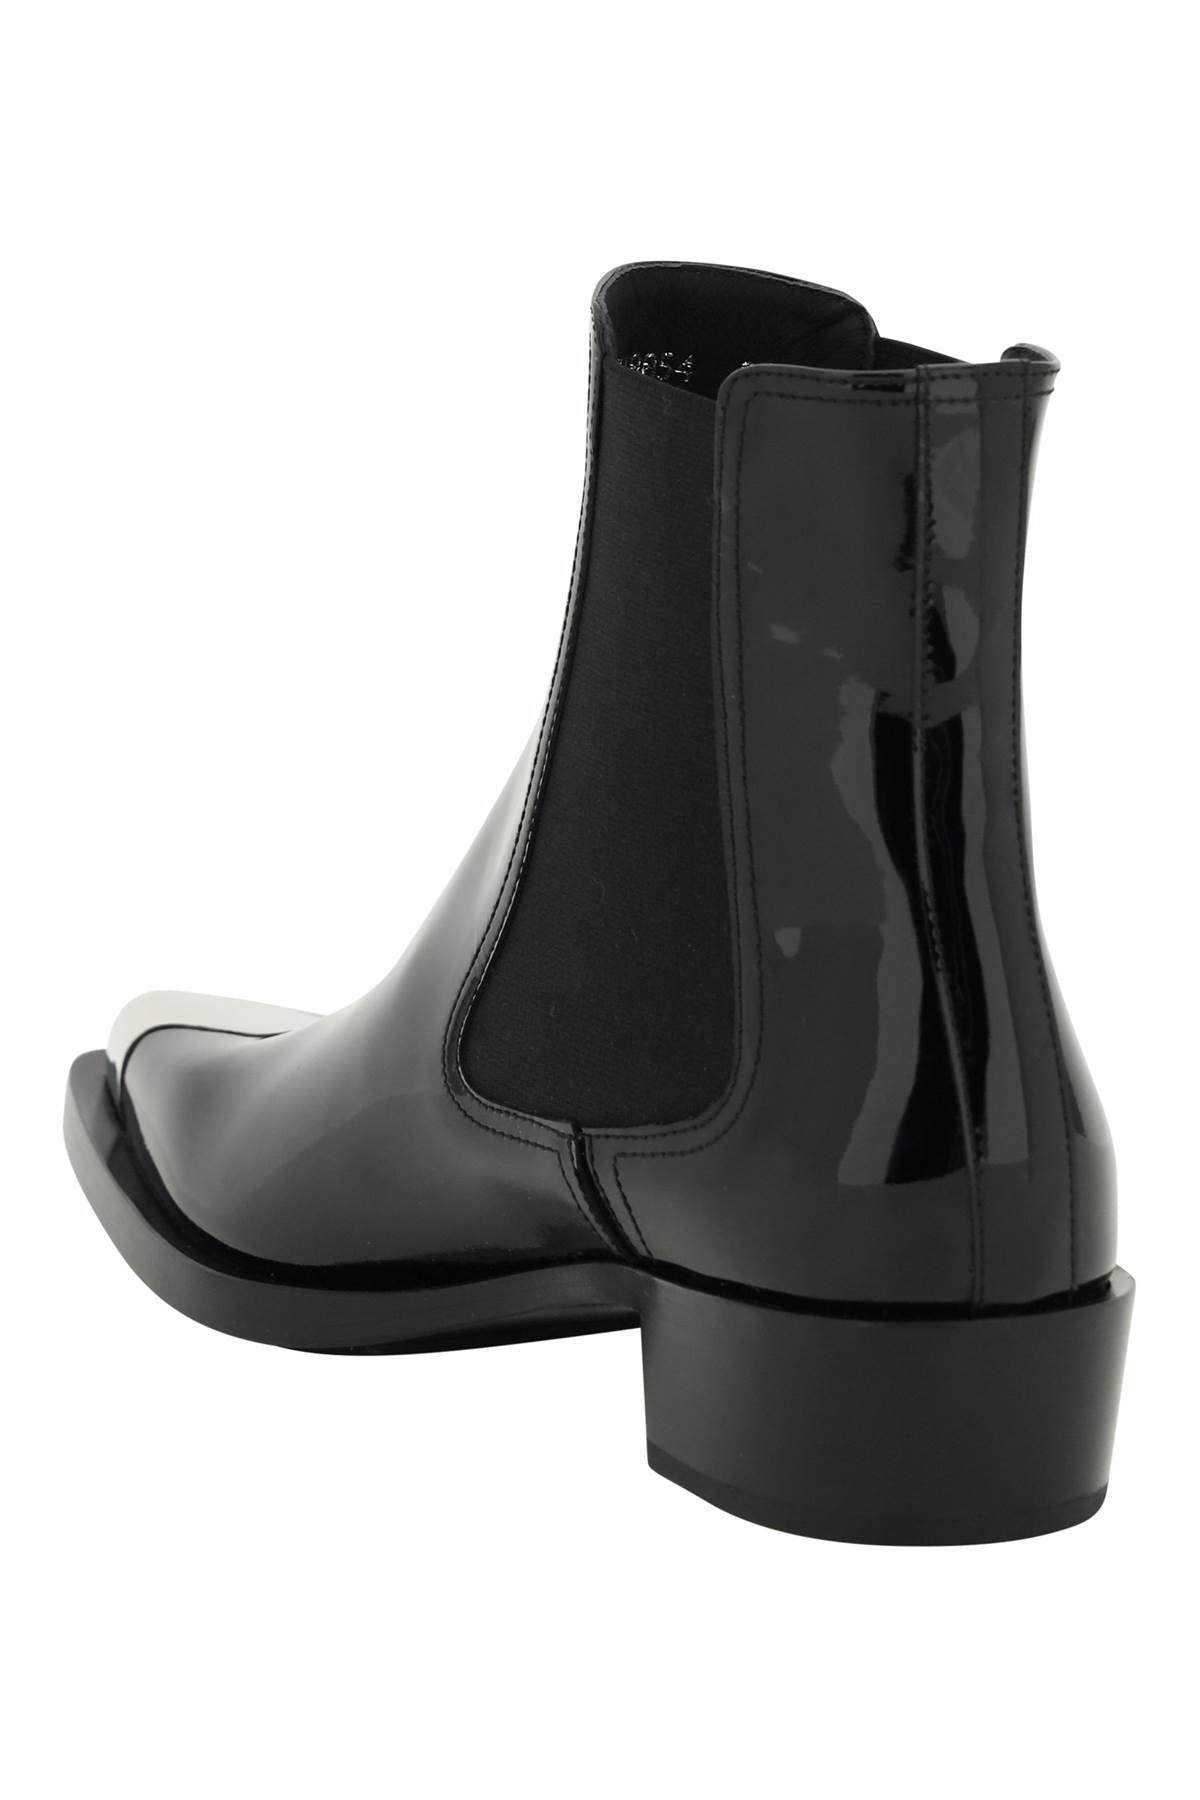 Alexander McQueen Punk Chelsea Ankle Boots In Patent in Black | Lyst